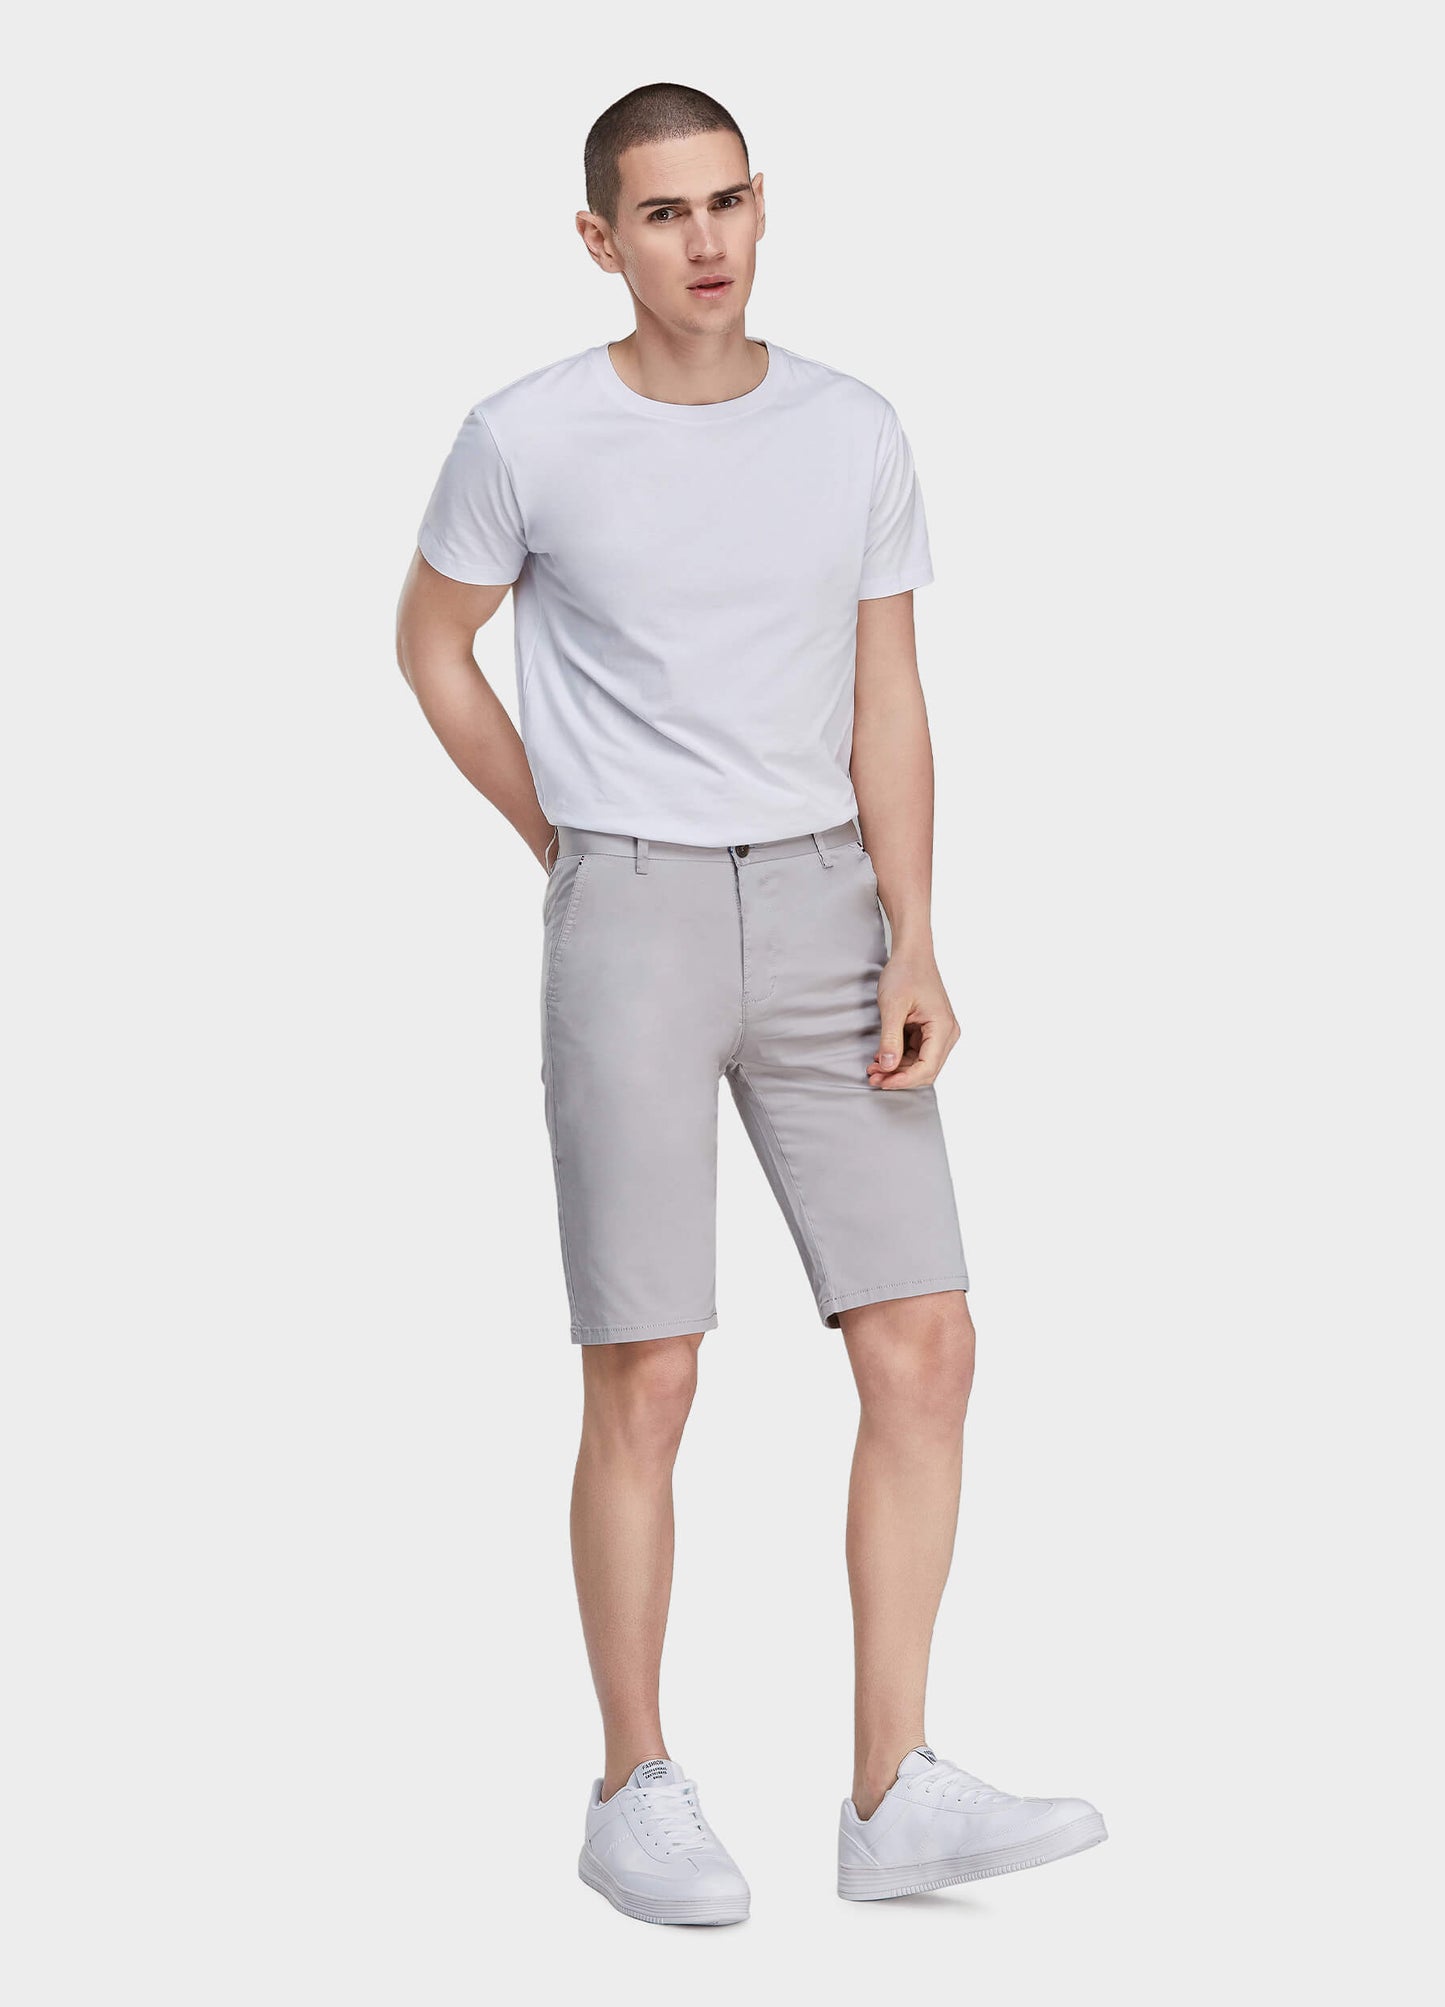 Men's Casual Button Closure Zipper Elasticity Solid Shorts with Slant Pocket-Light Grey side view